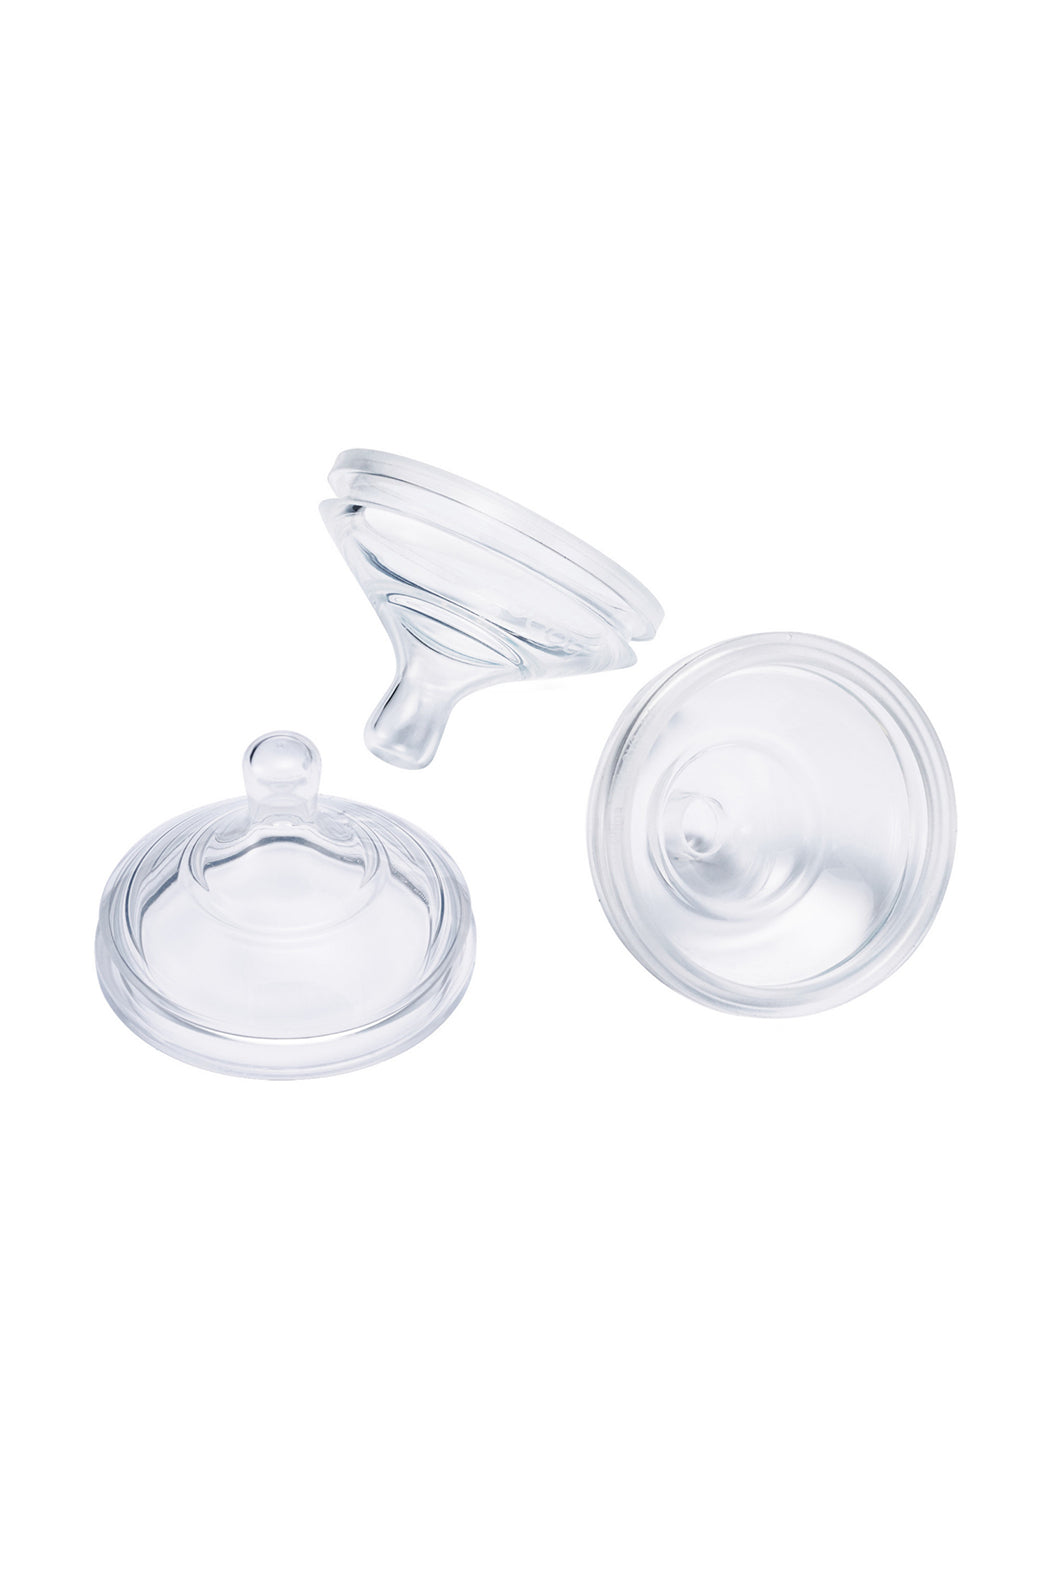 boon by Tomy Nursh Silicone Nipples - Extra Slow